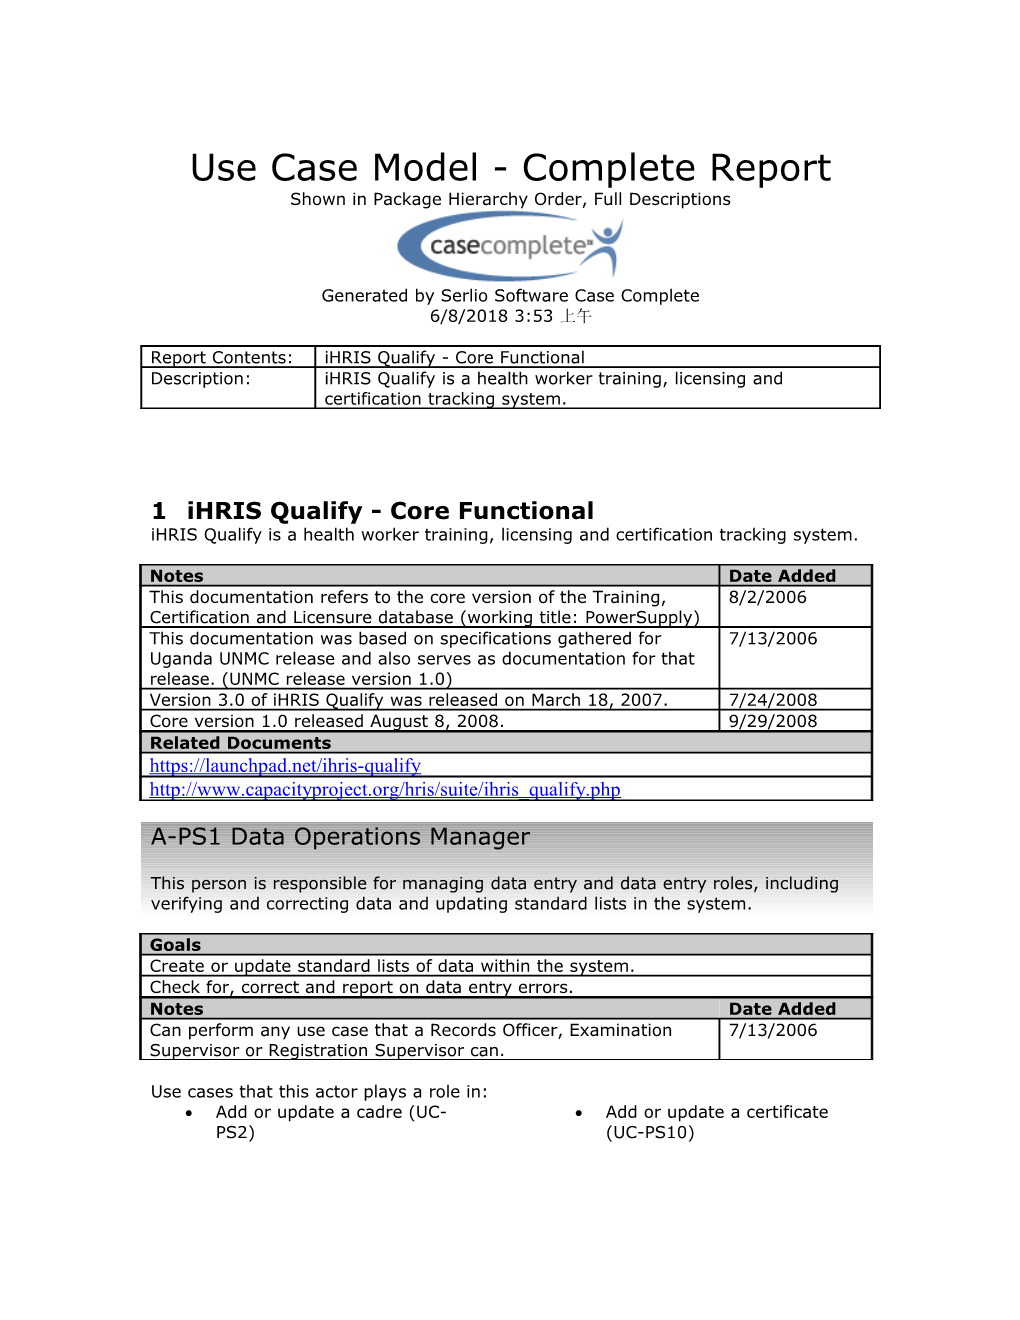 Use Case Model - Complete Report